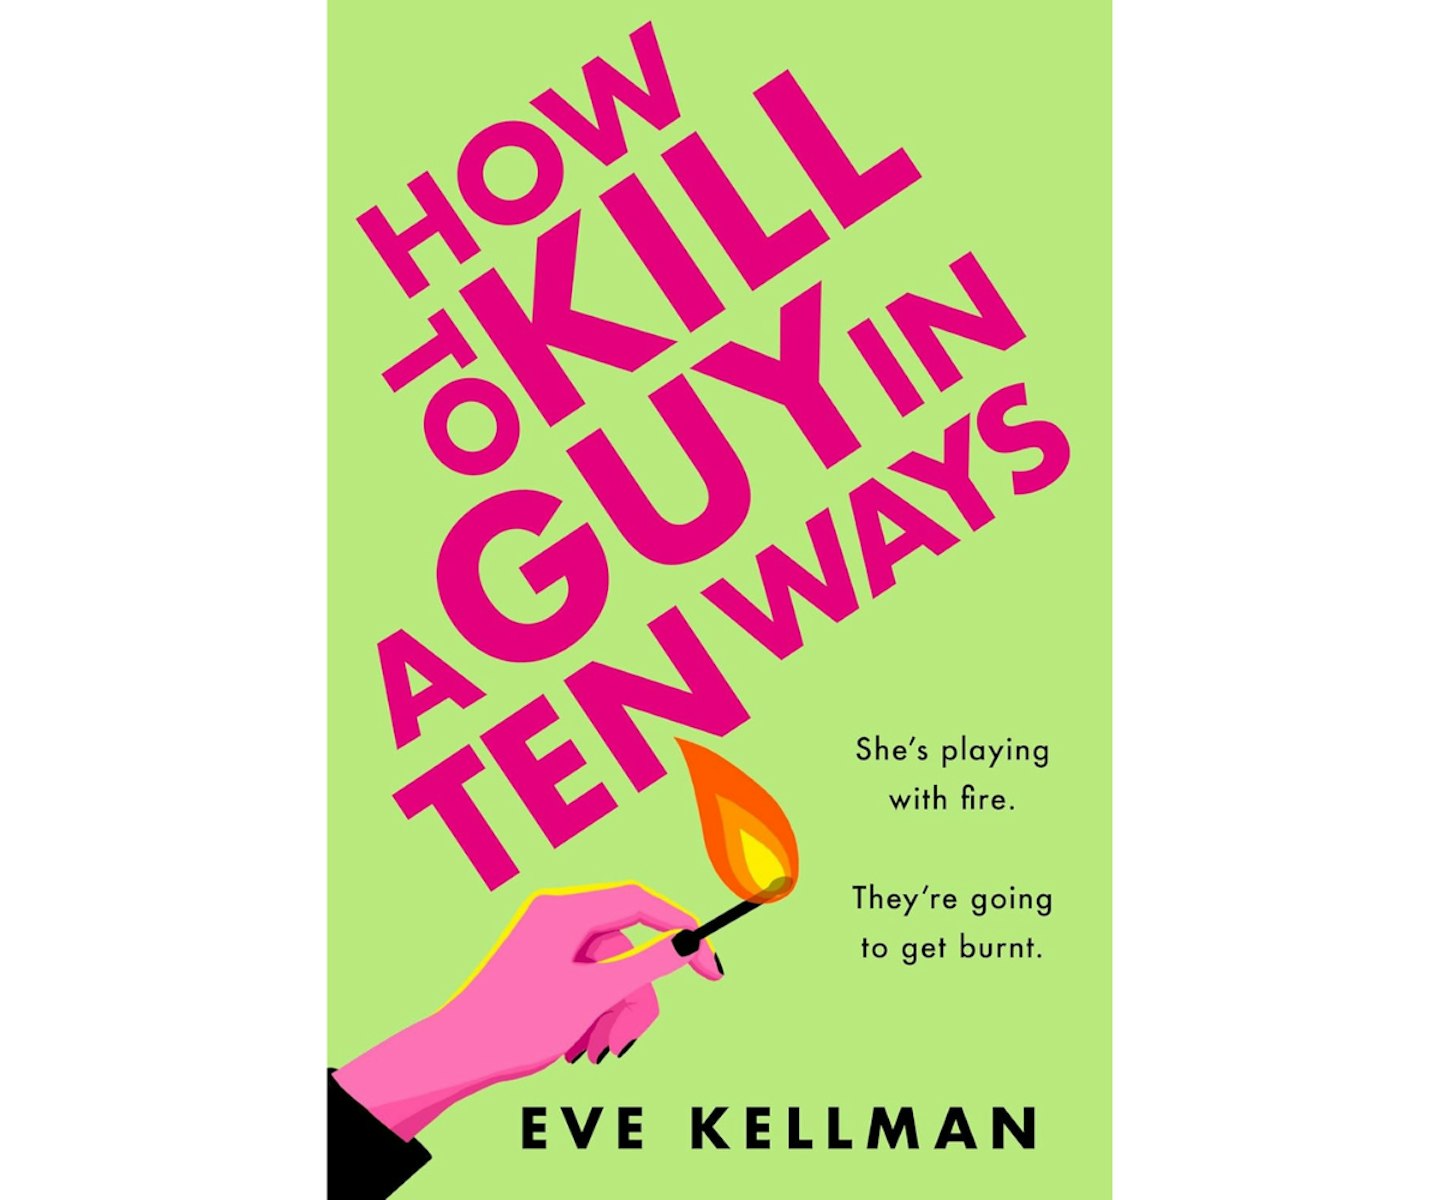 How To Kill A Guy in Ten Ways by Eve Kellman